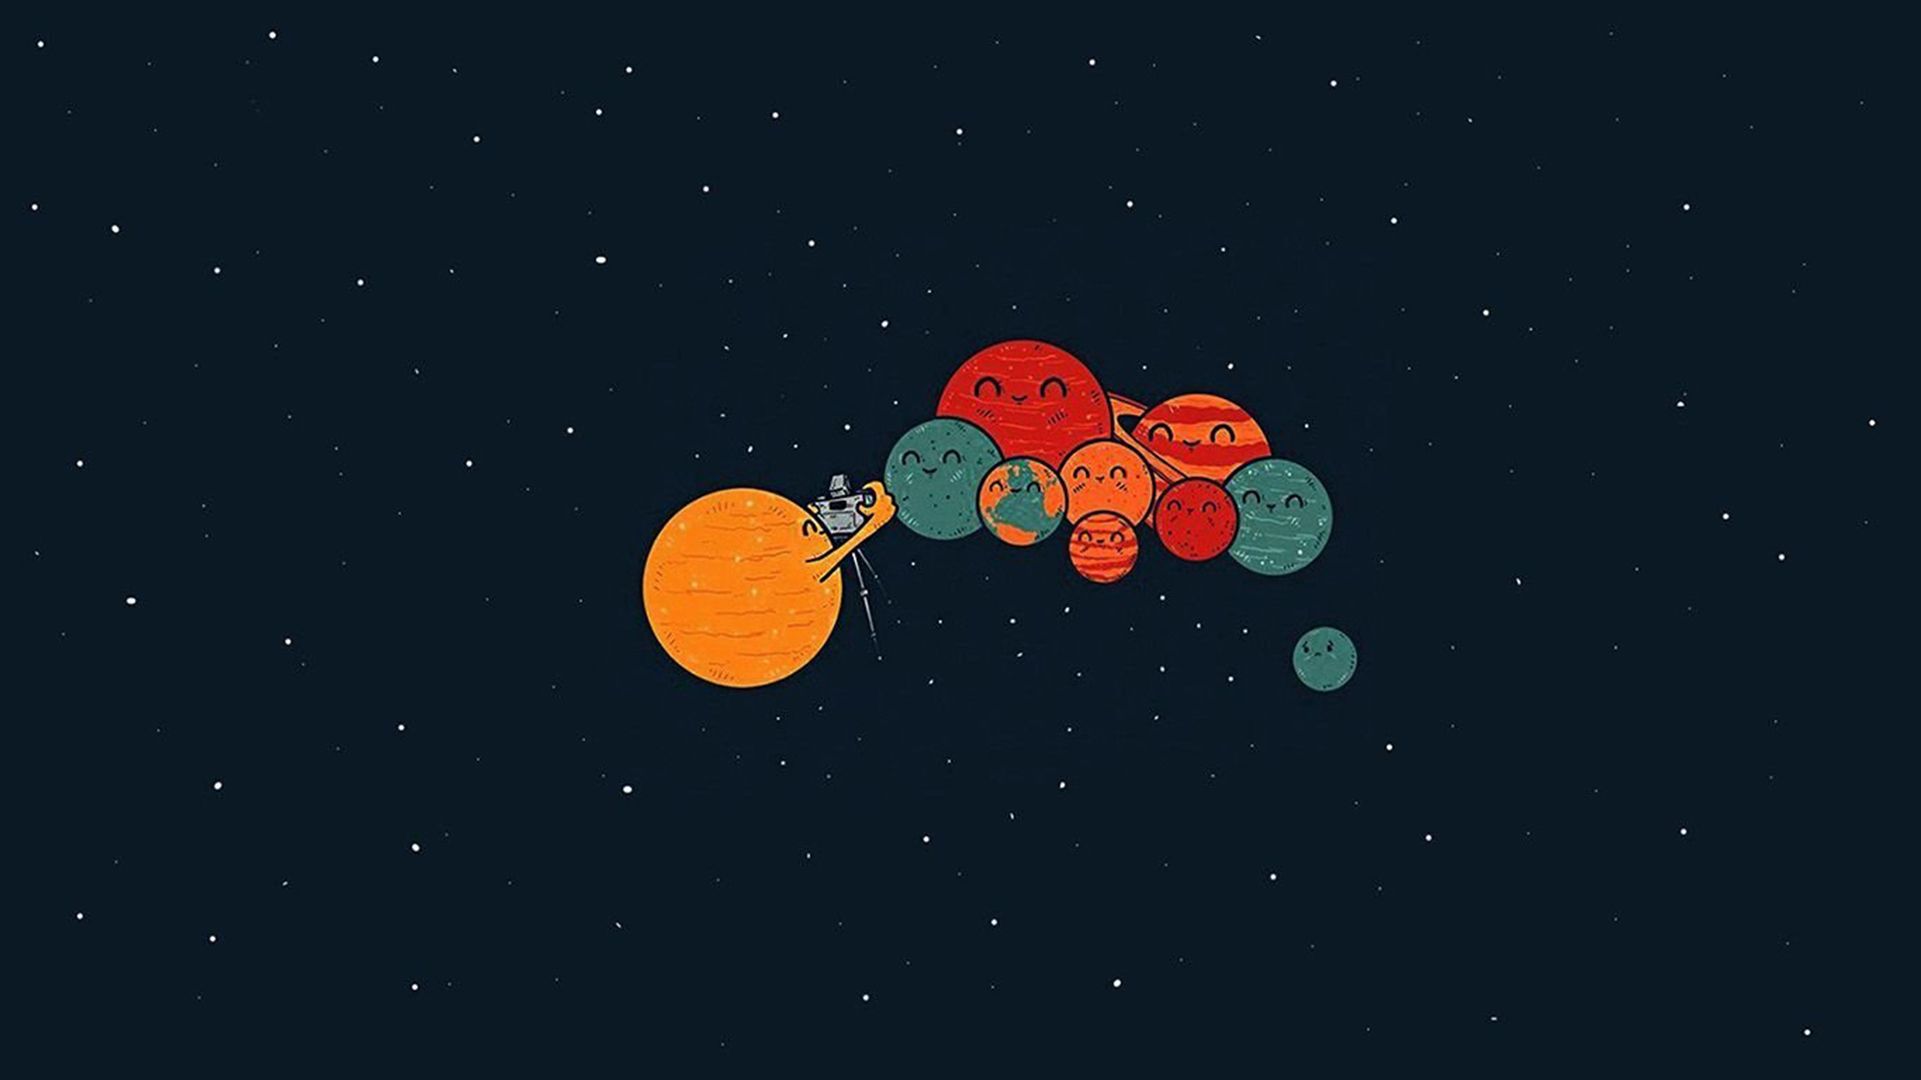 An illustration of a person on a planet surrounded by many planets with faces. - Desktop, space, Mars